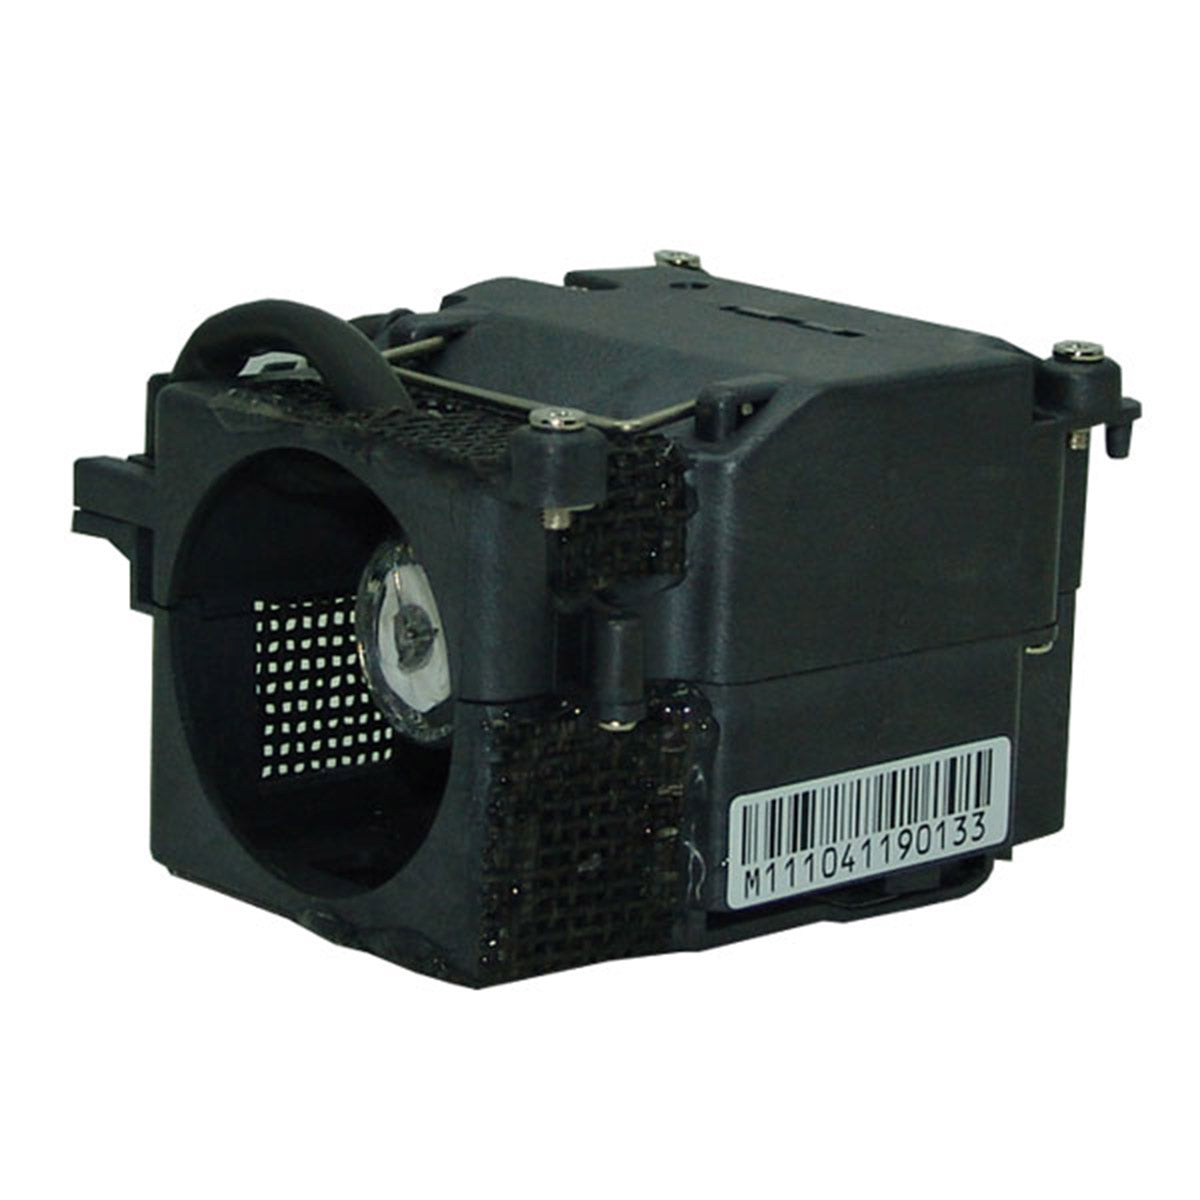 Knoll Systems U3-130 Compatible Projector Lamp Module